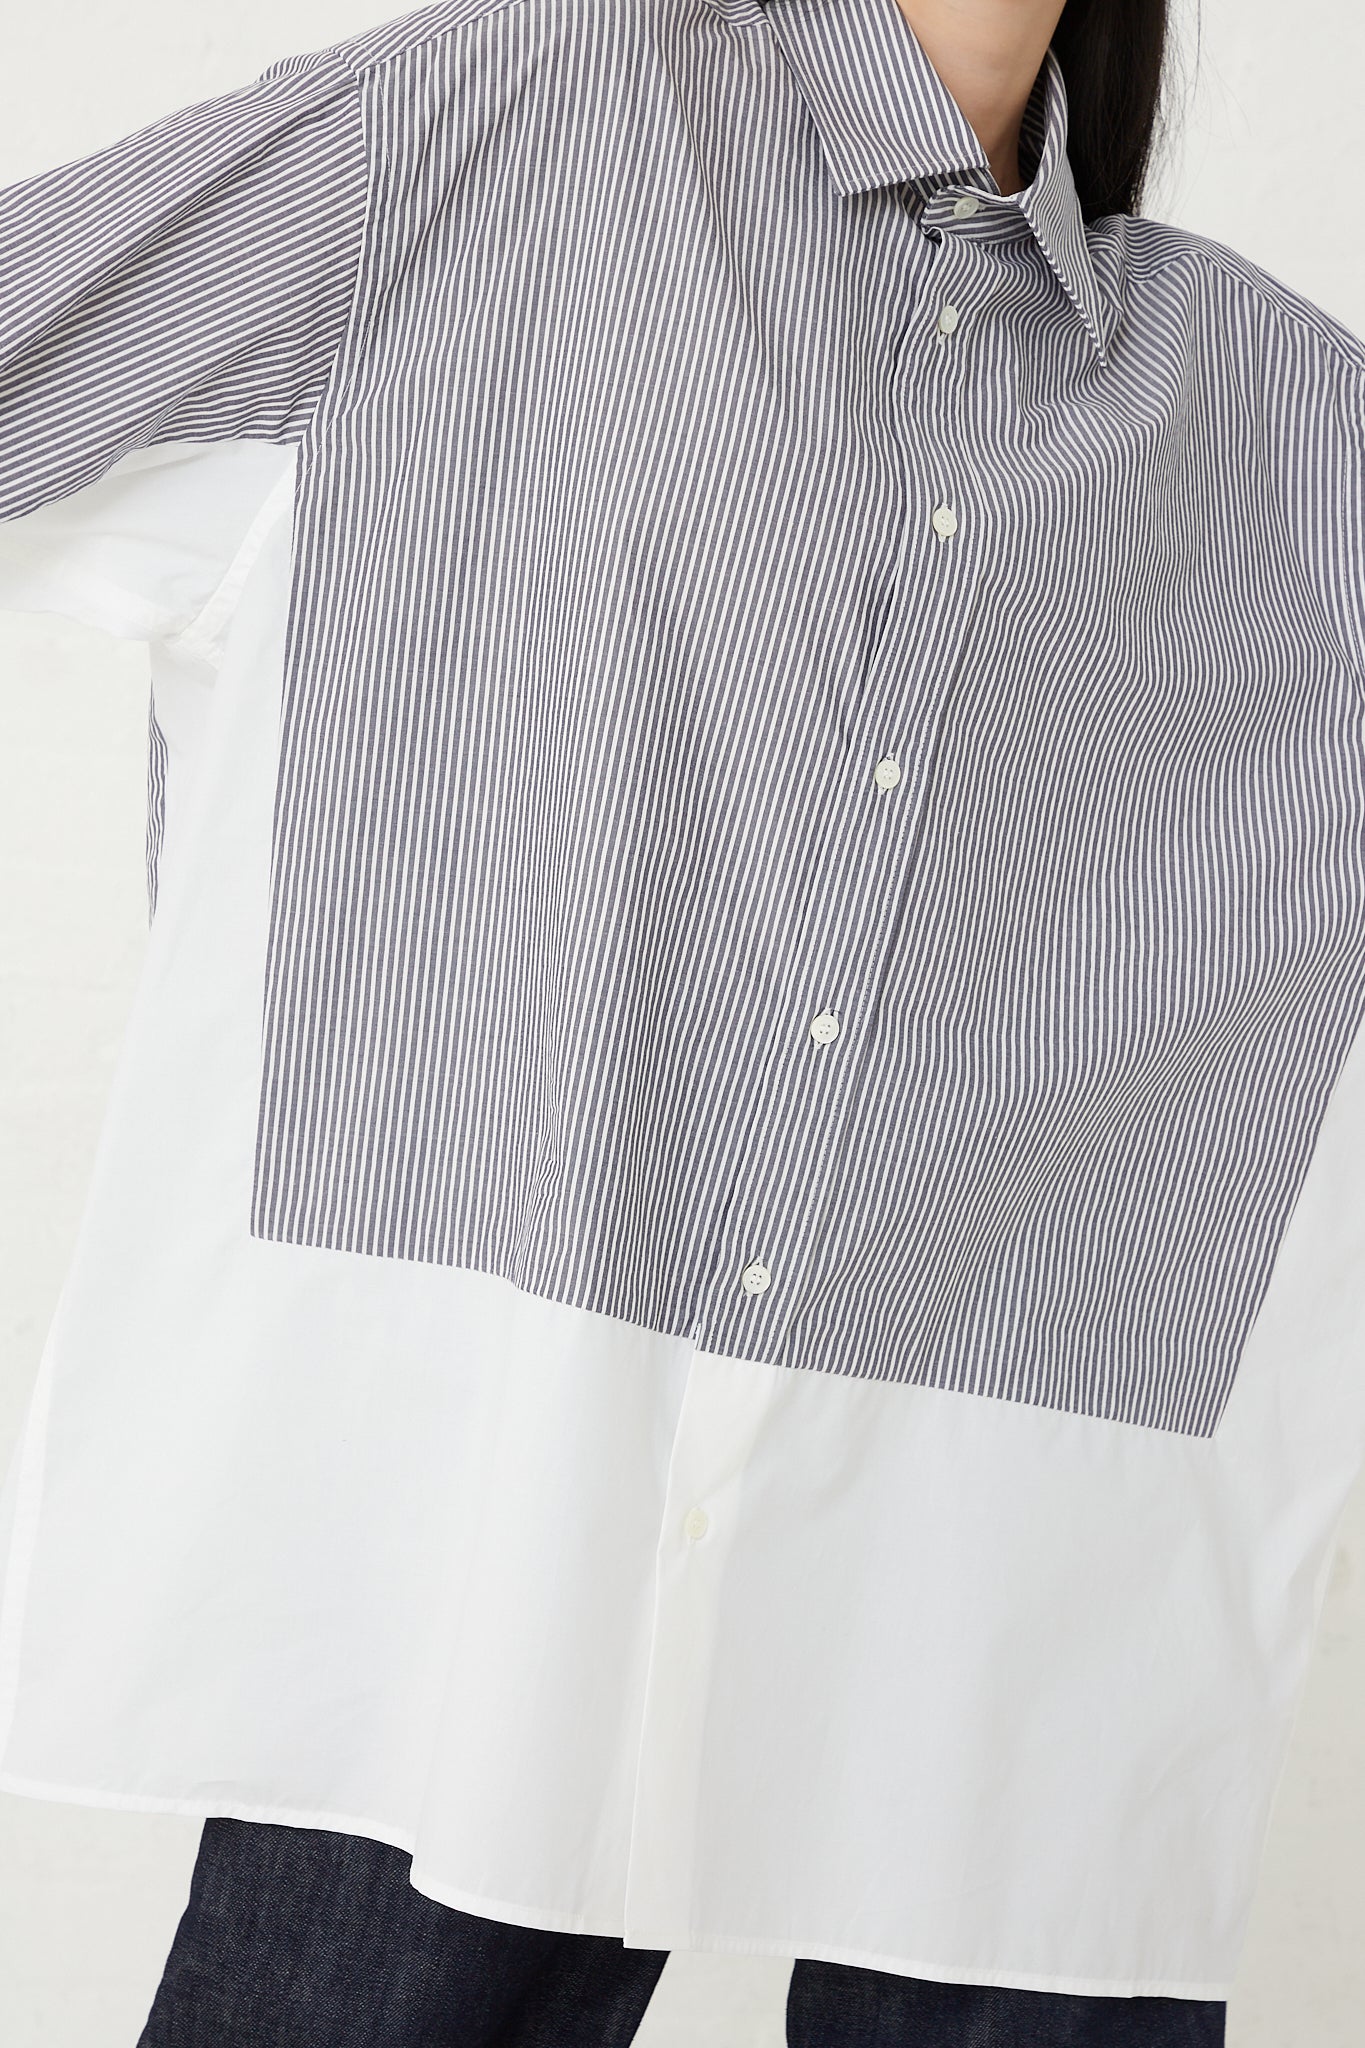 An oversized fit woman's button-front MM6 shirt made of striped Cotton Long Sleeved Shirt in Dark Grey and White.